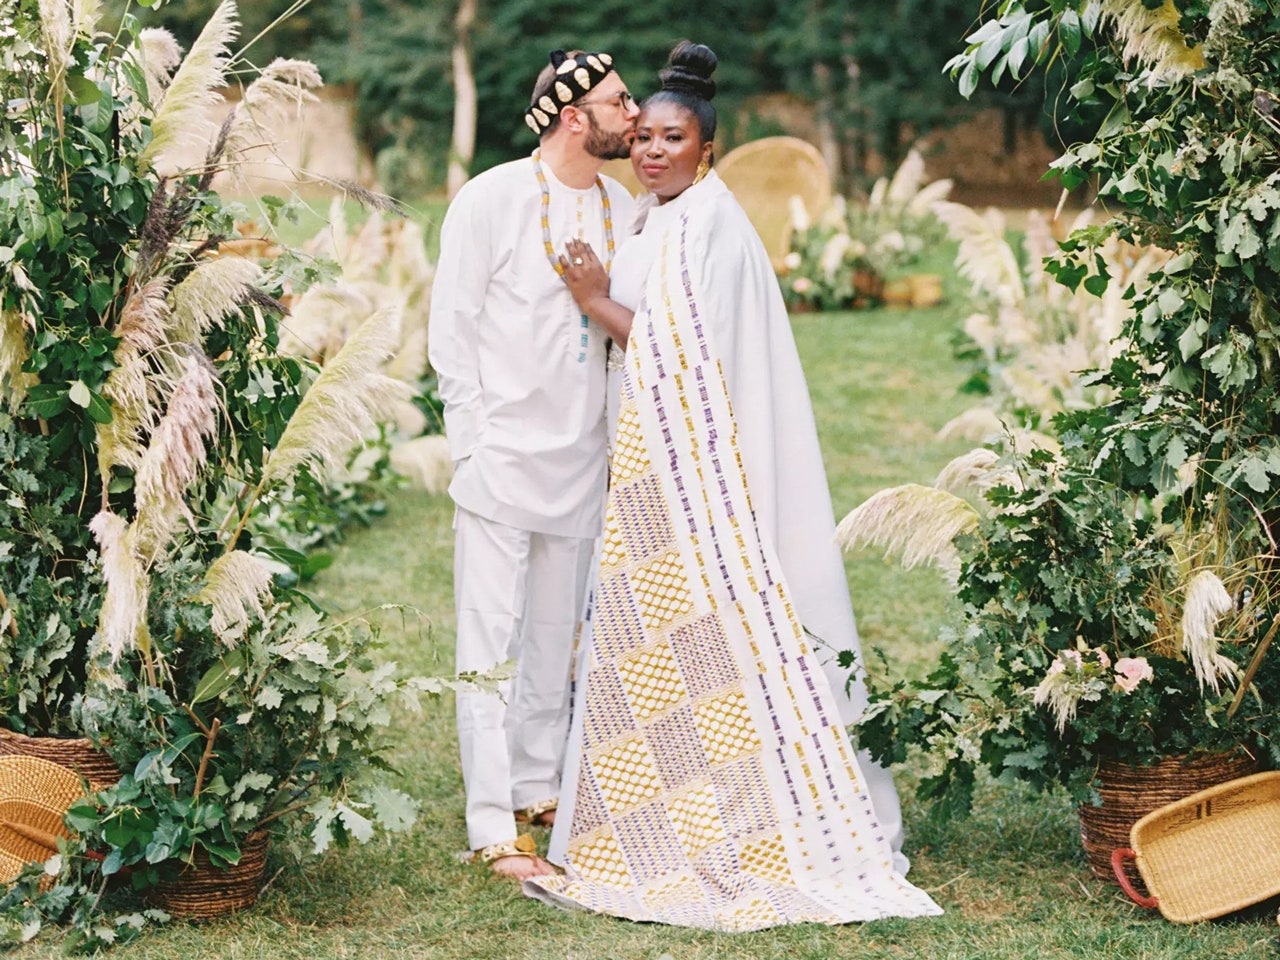 Makeda Saggau-Sackey’s Wedding Festivities Introduced Ghanaian Traditions to a Chateau in France